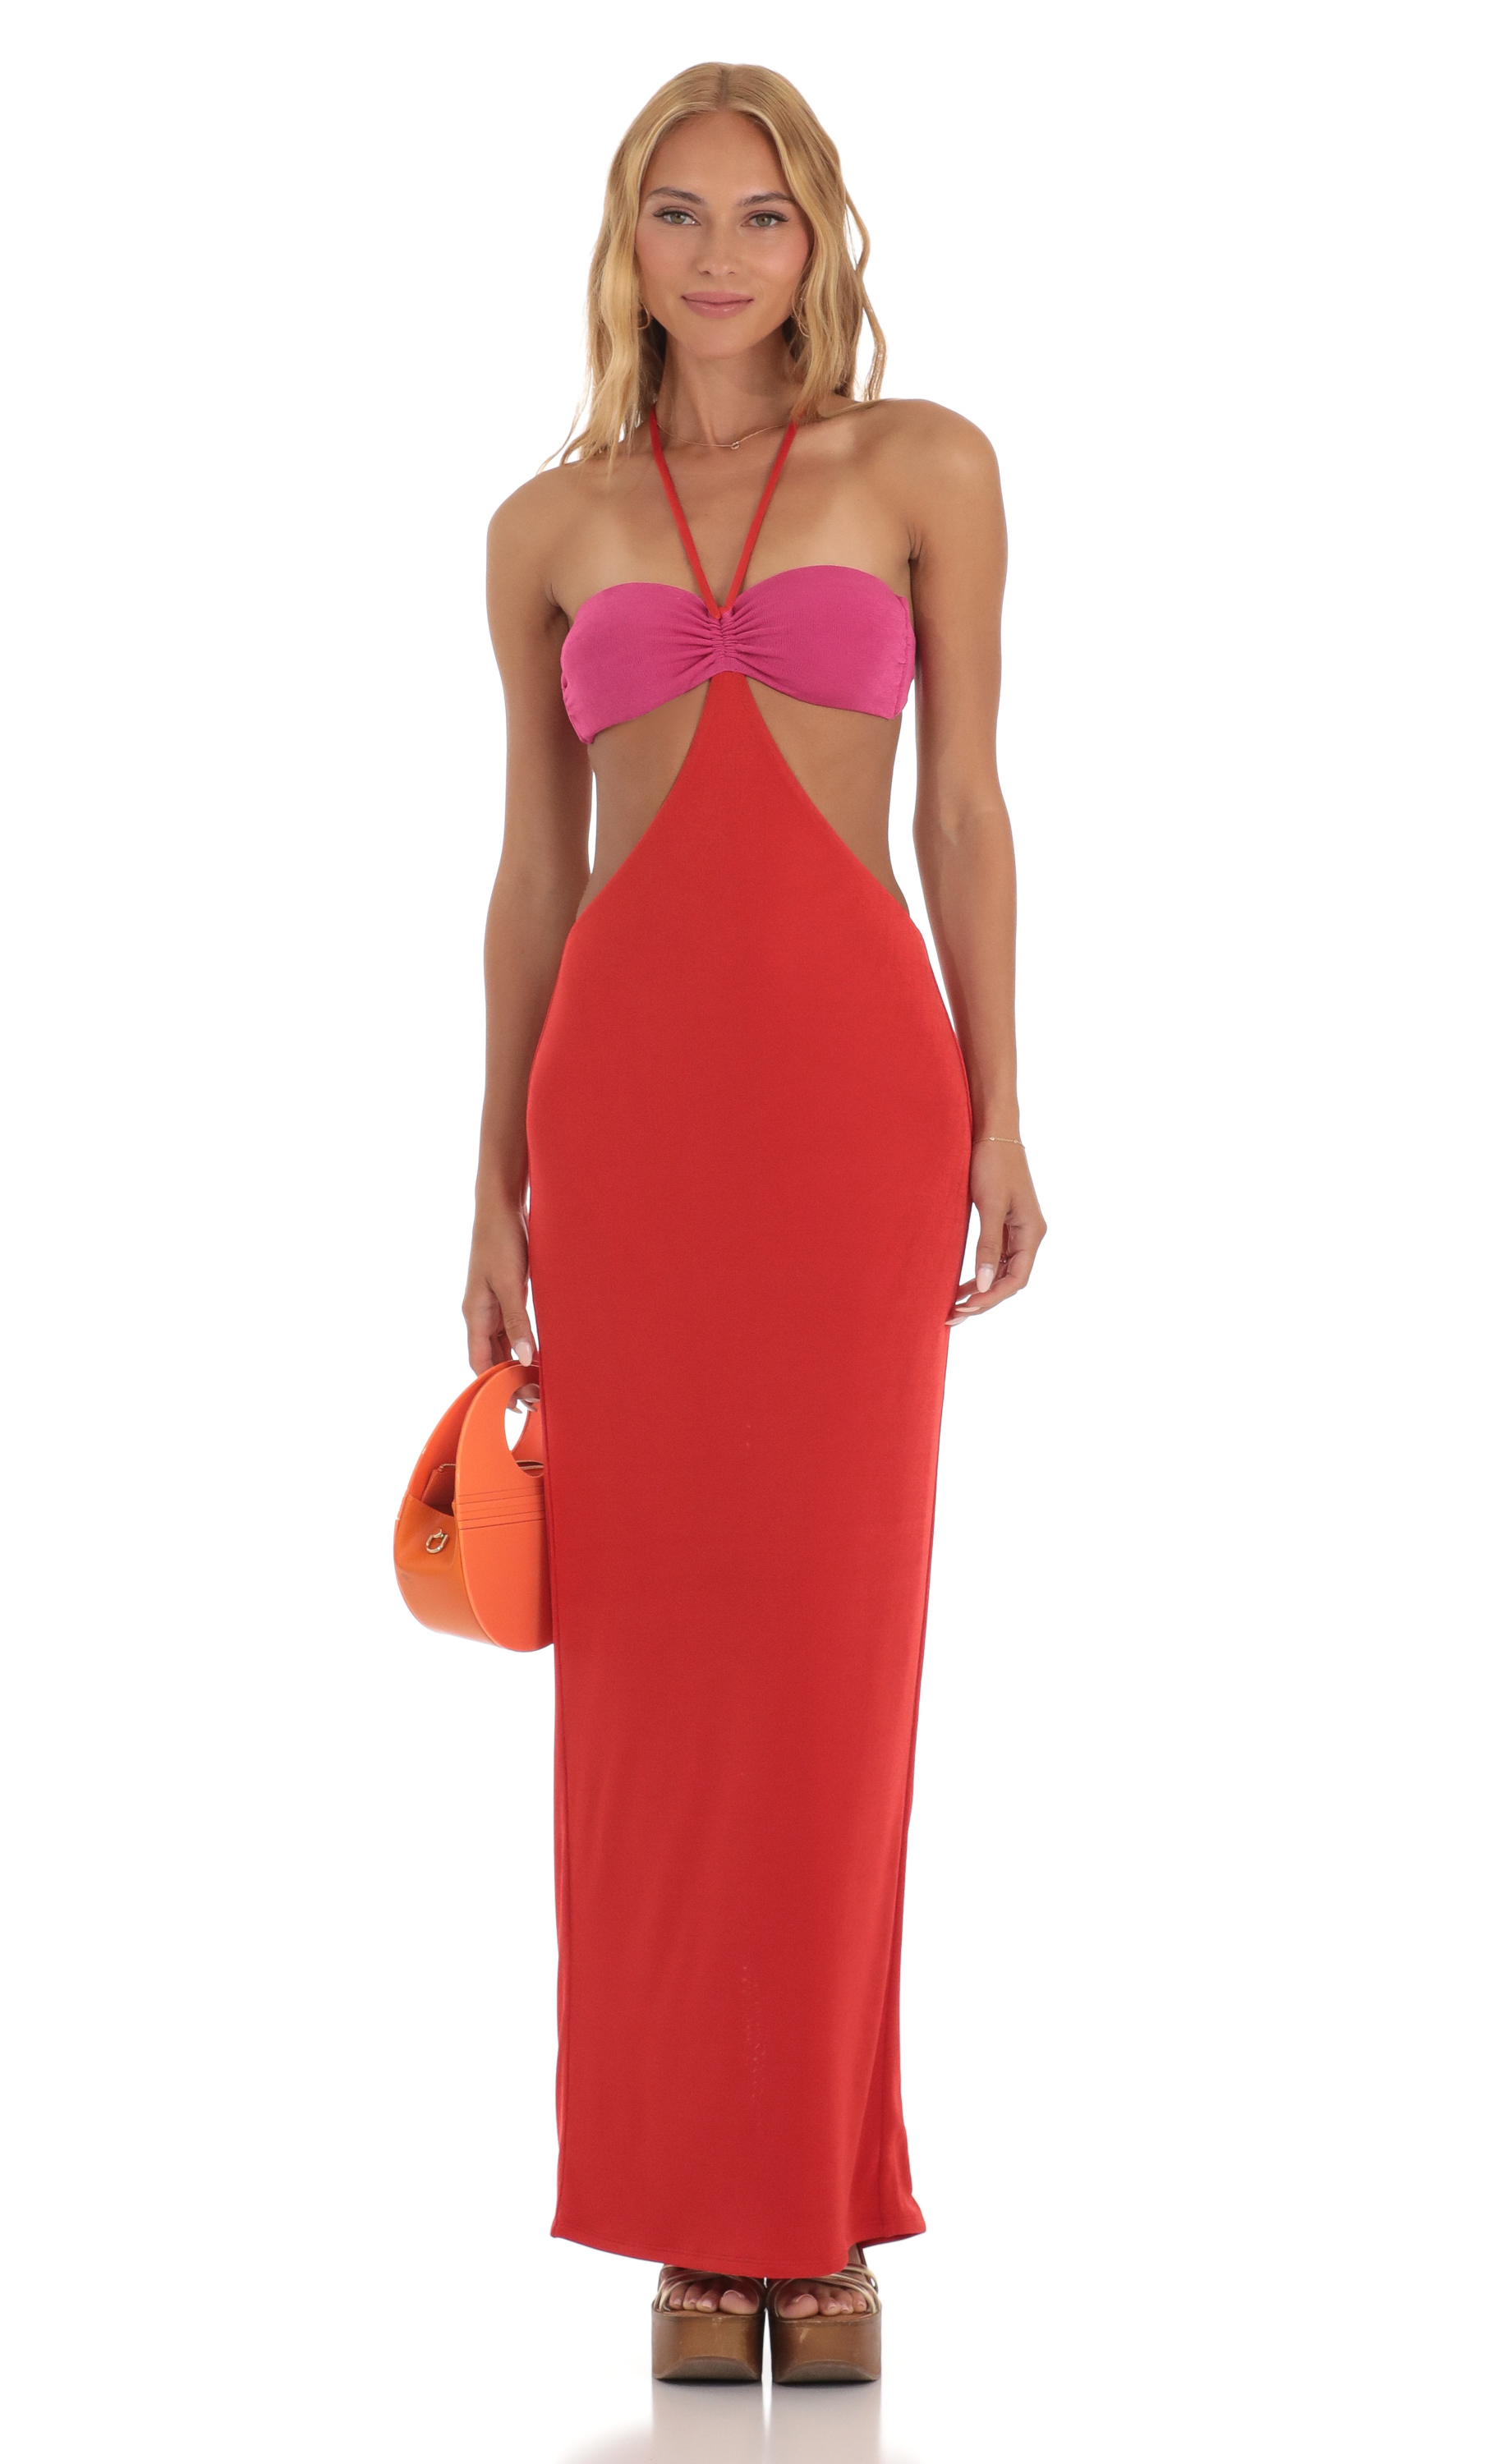 Sonora Two Toned Cutout Maxi Dress in Red and Pink